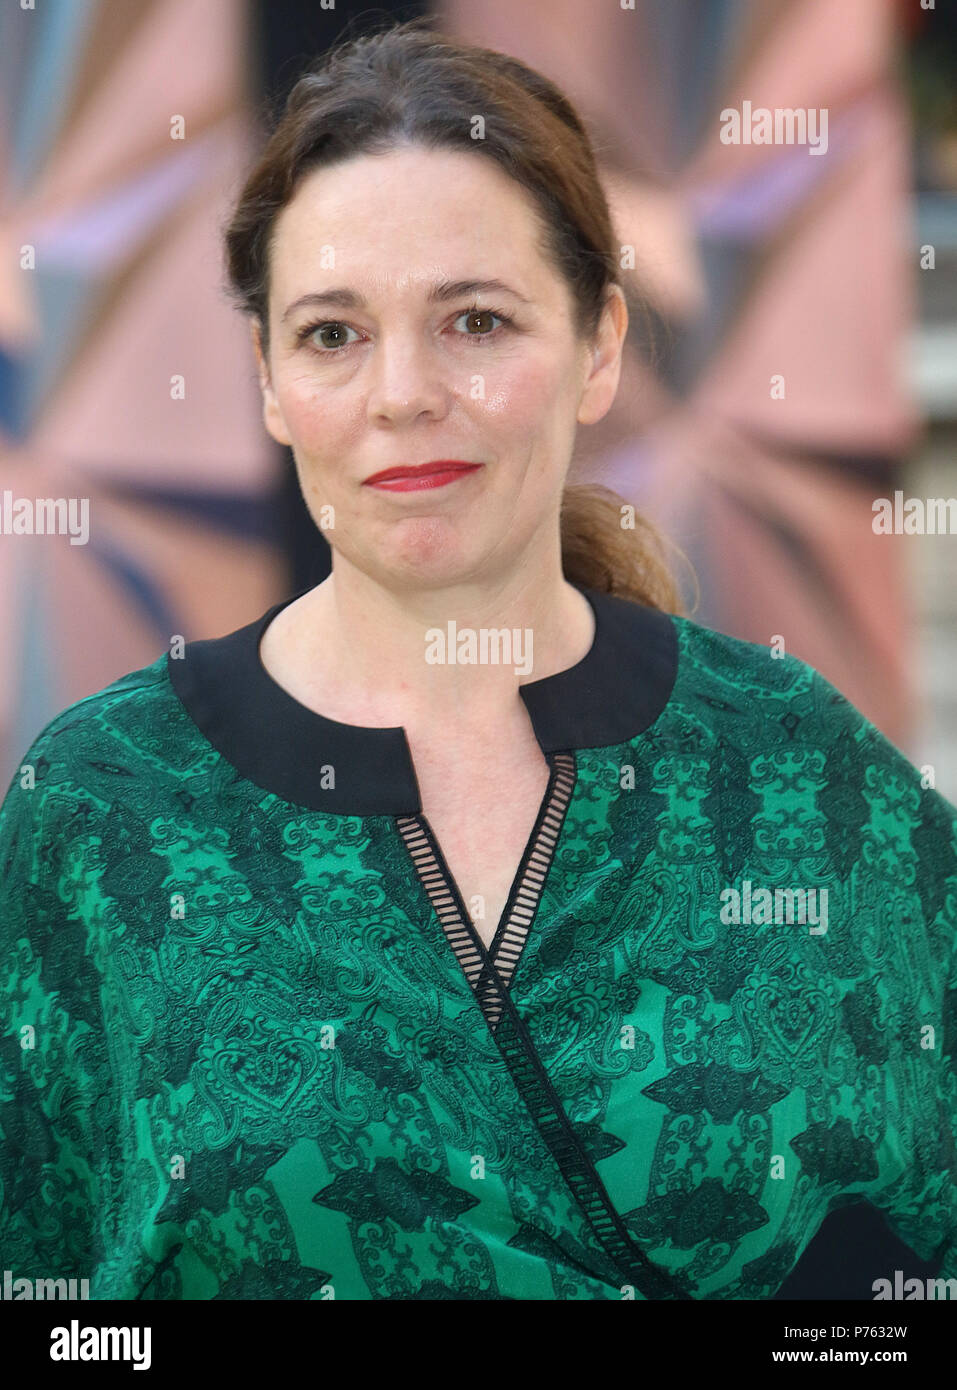 Jun 06, 2018 - Olivia Colman attending Royal Academy Of Arts 250th Summer Exhibition Preview Party at Burlington House in London, England, UK Stock Photo